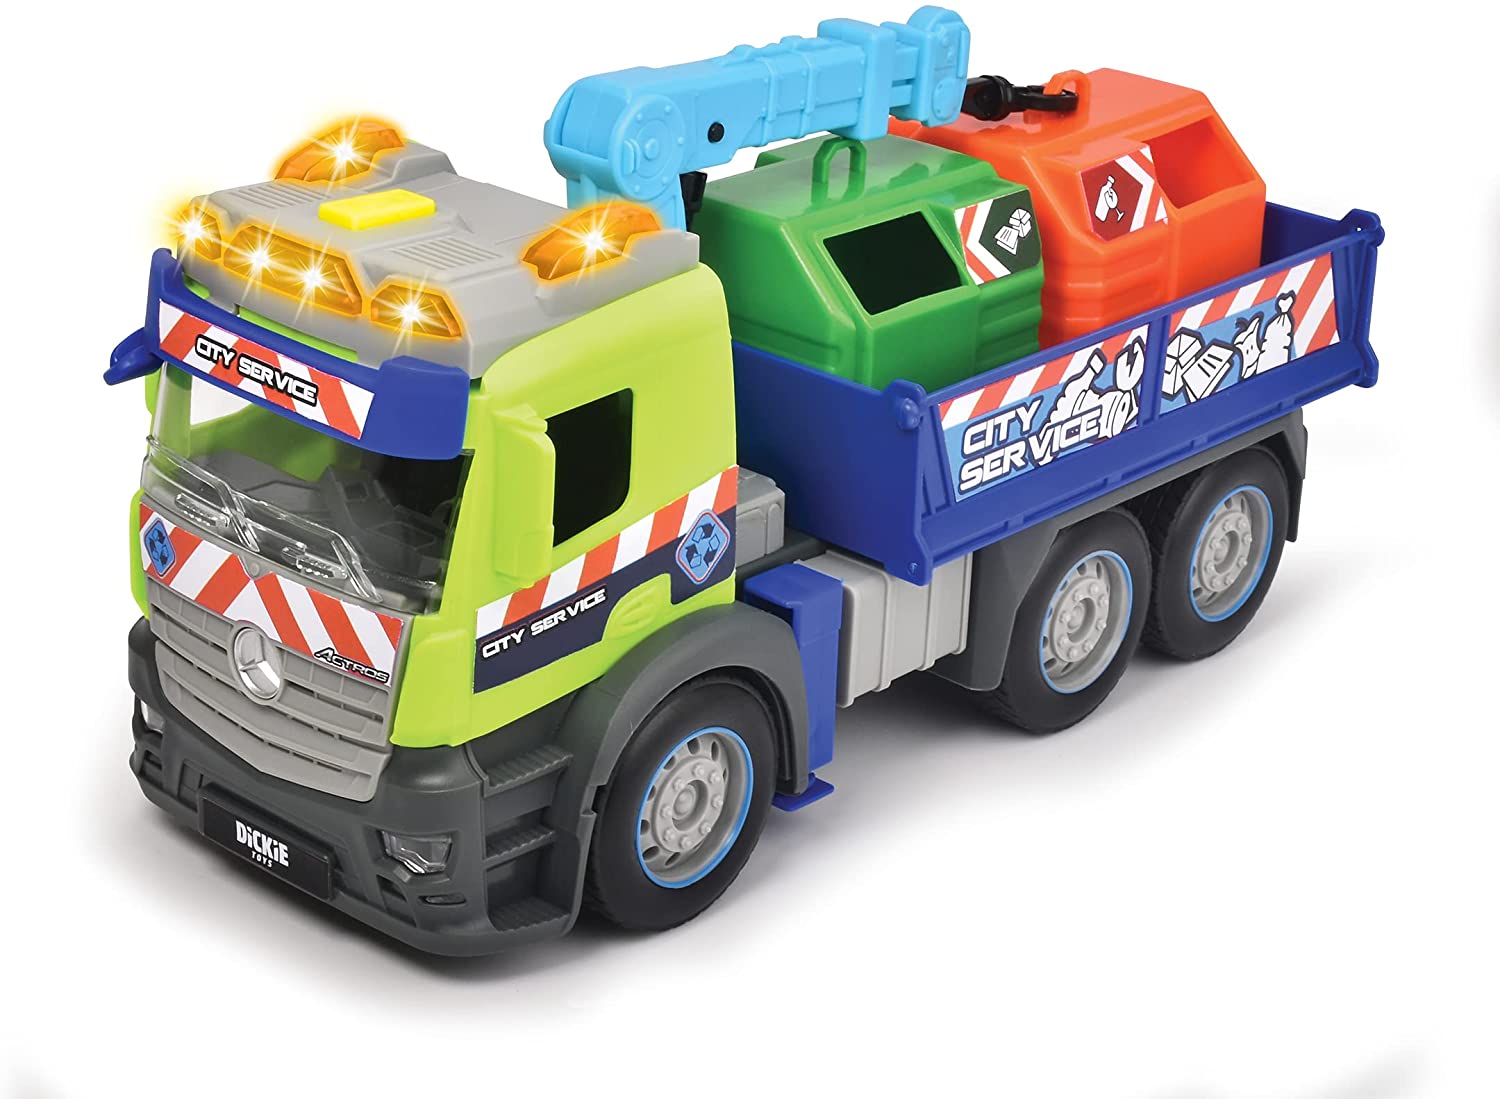 Masina - Truck-Recycling - Green-Blue, 26 cm | Dickie Toys - 5